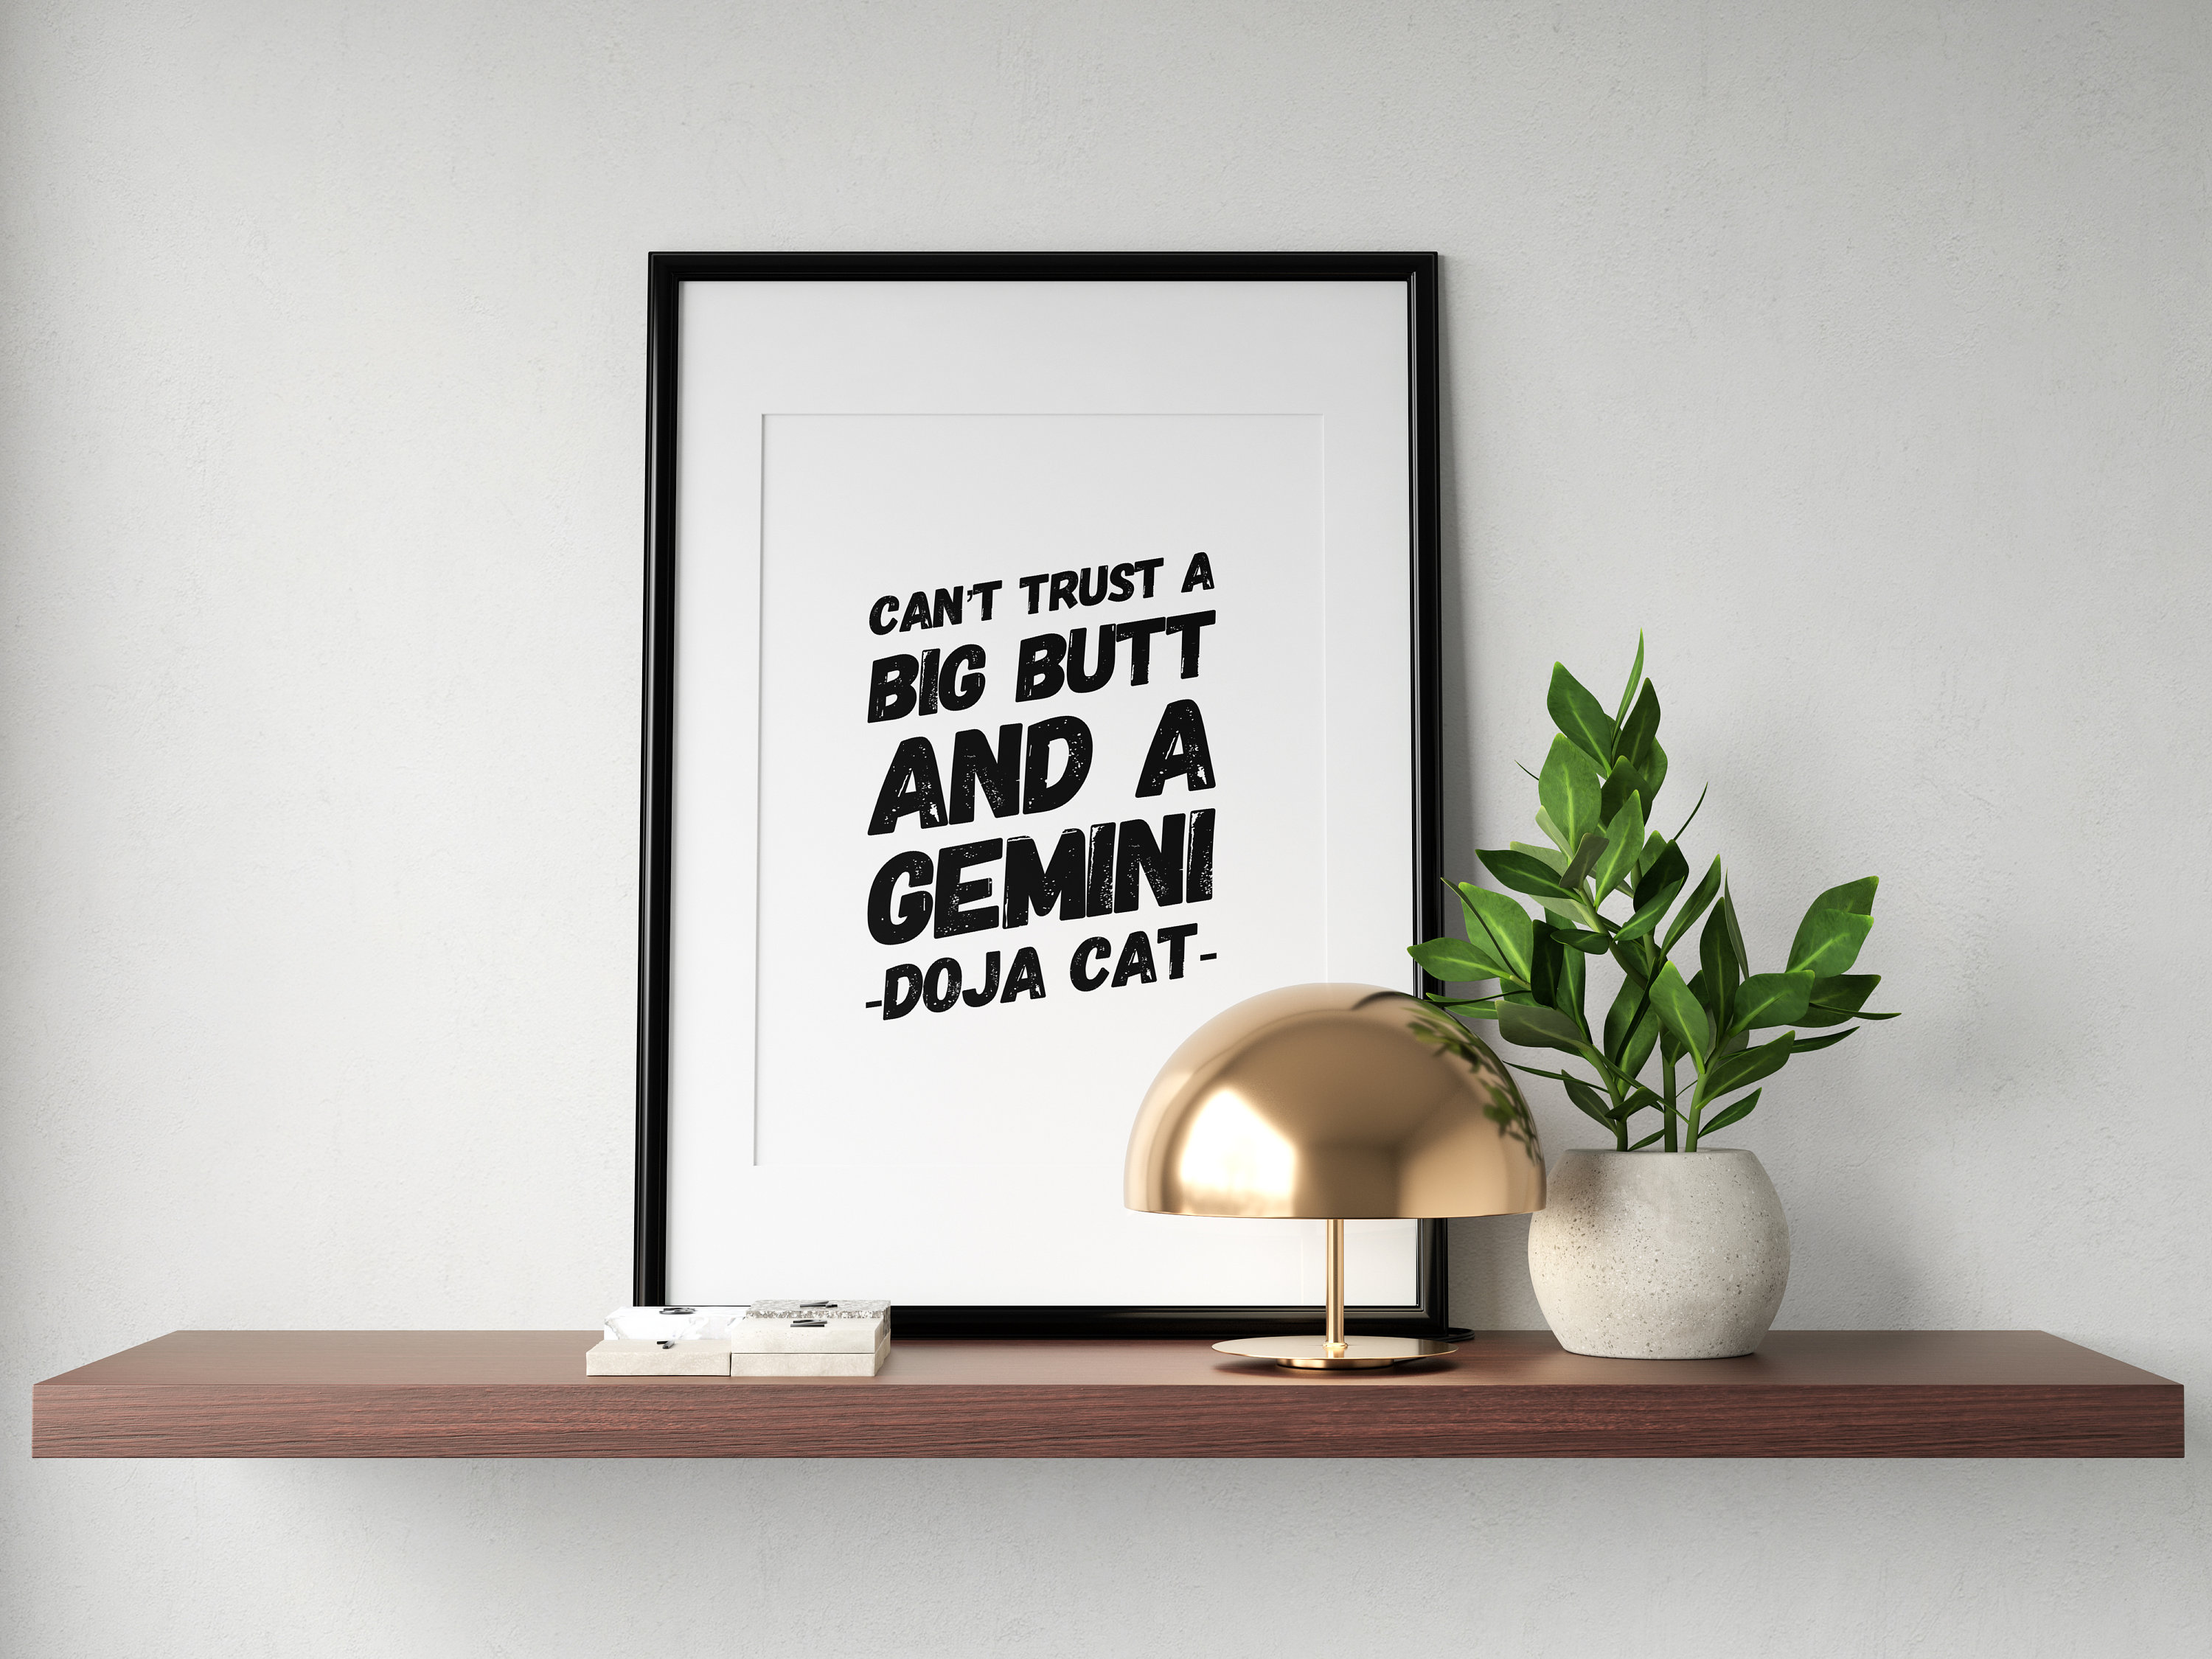 Typography Doja Cat Lyrics 11x14 Inch PRINTABLE INSTANT DOWNLOAD Quote big  Butt and a Gemini Quote Poster 